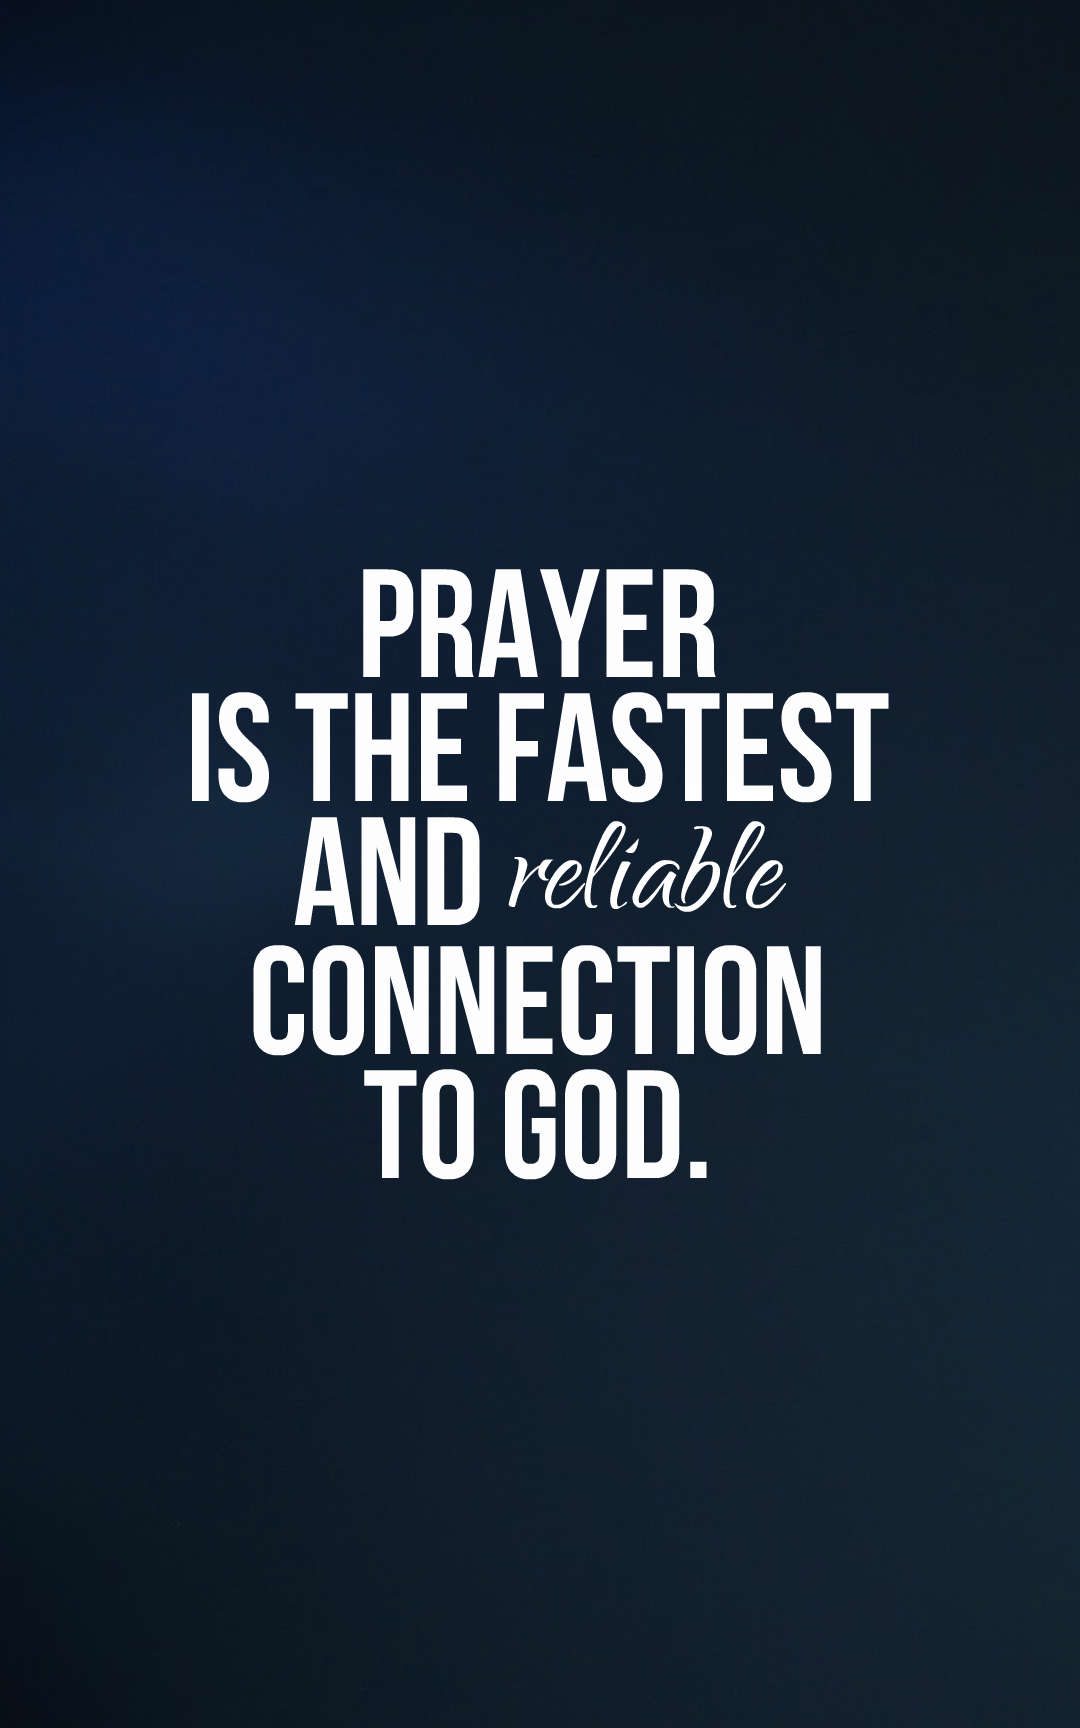 Prayer is the fastest and reliable connection to God.